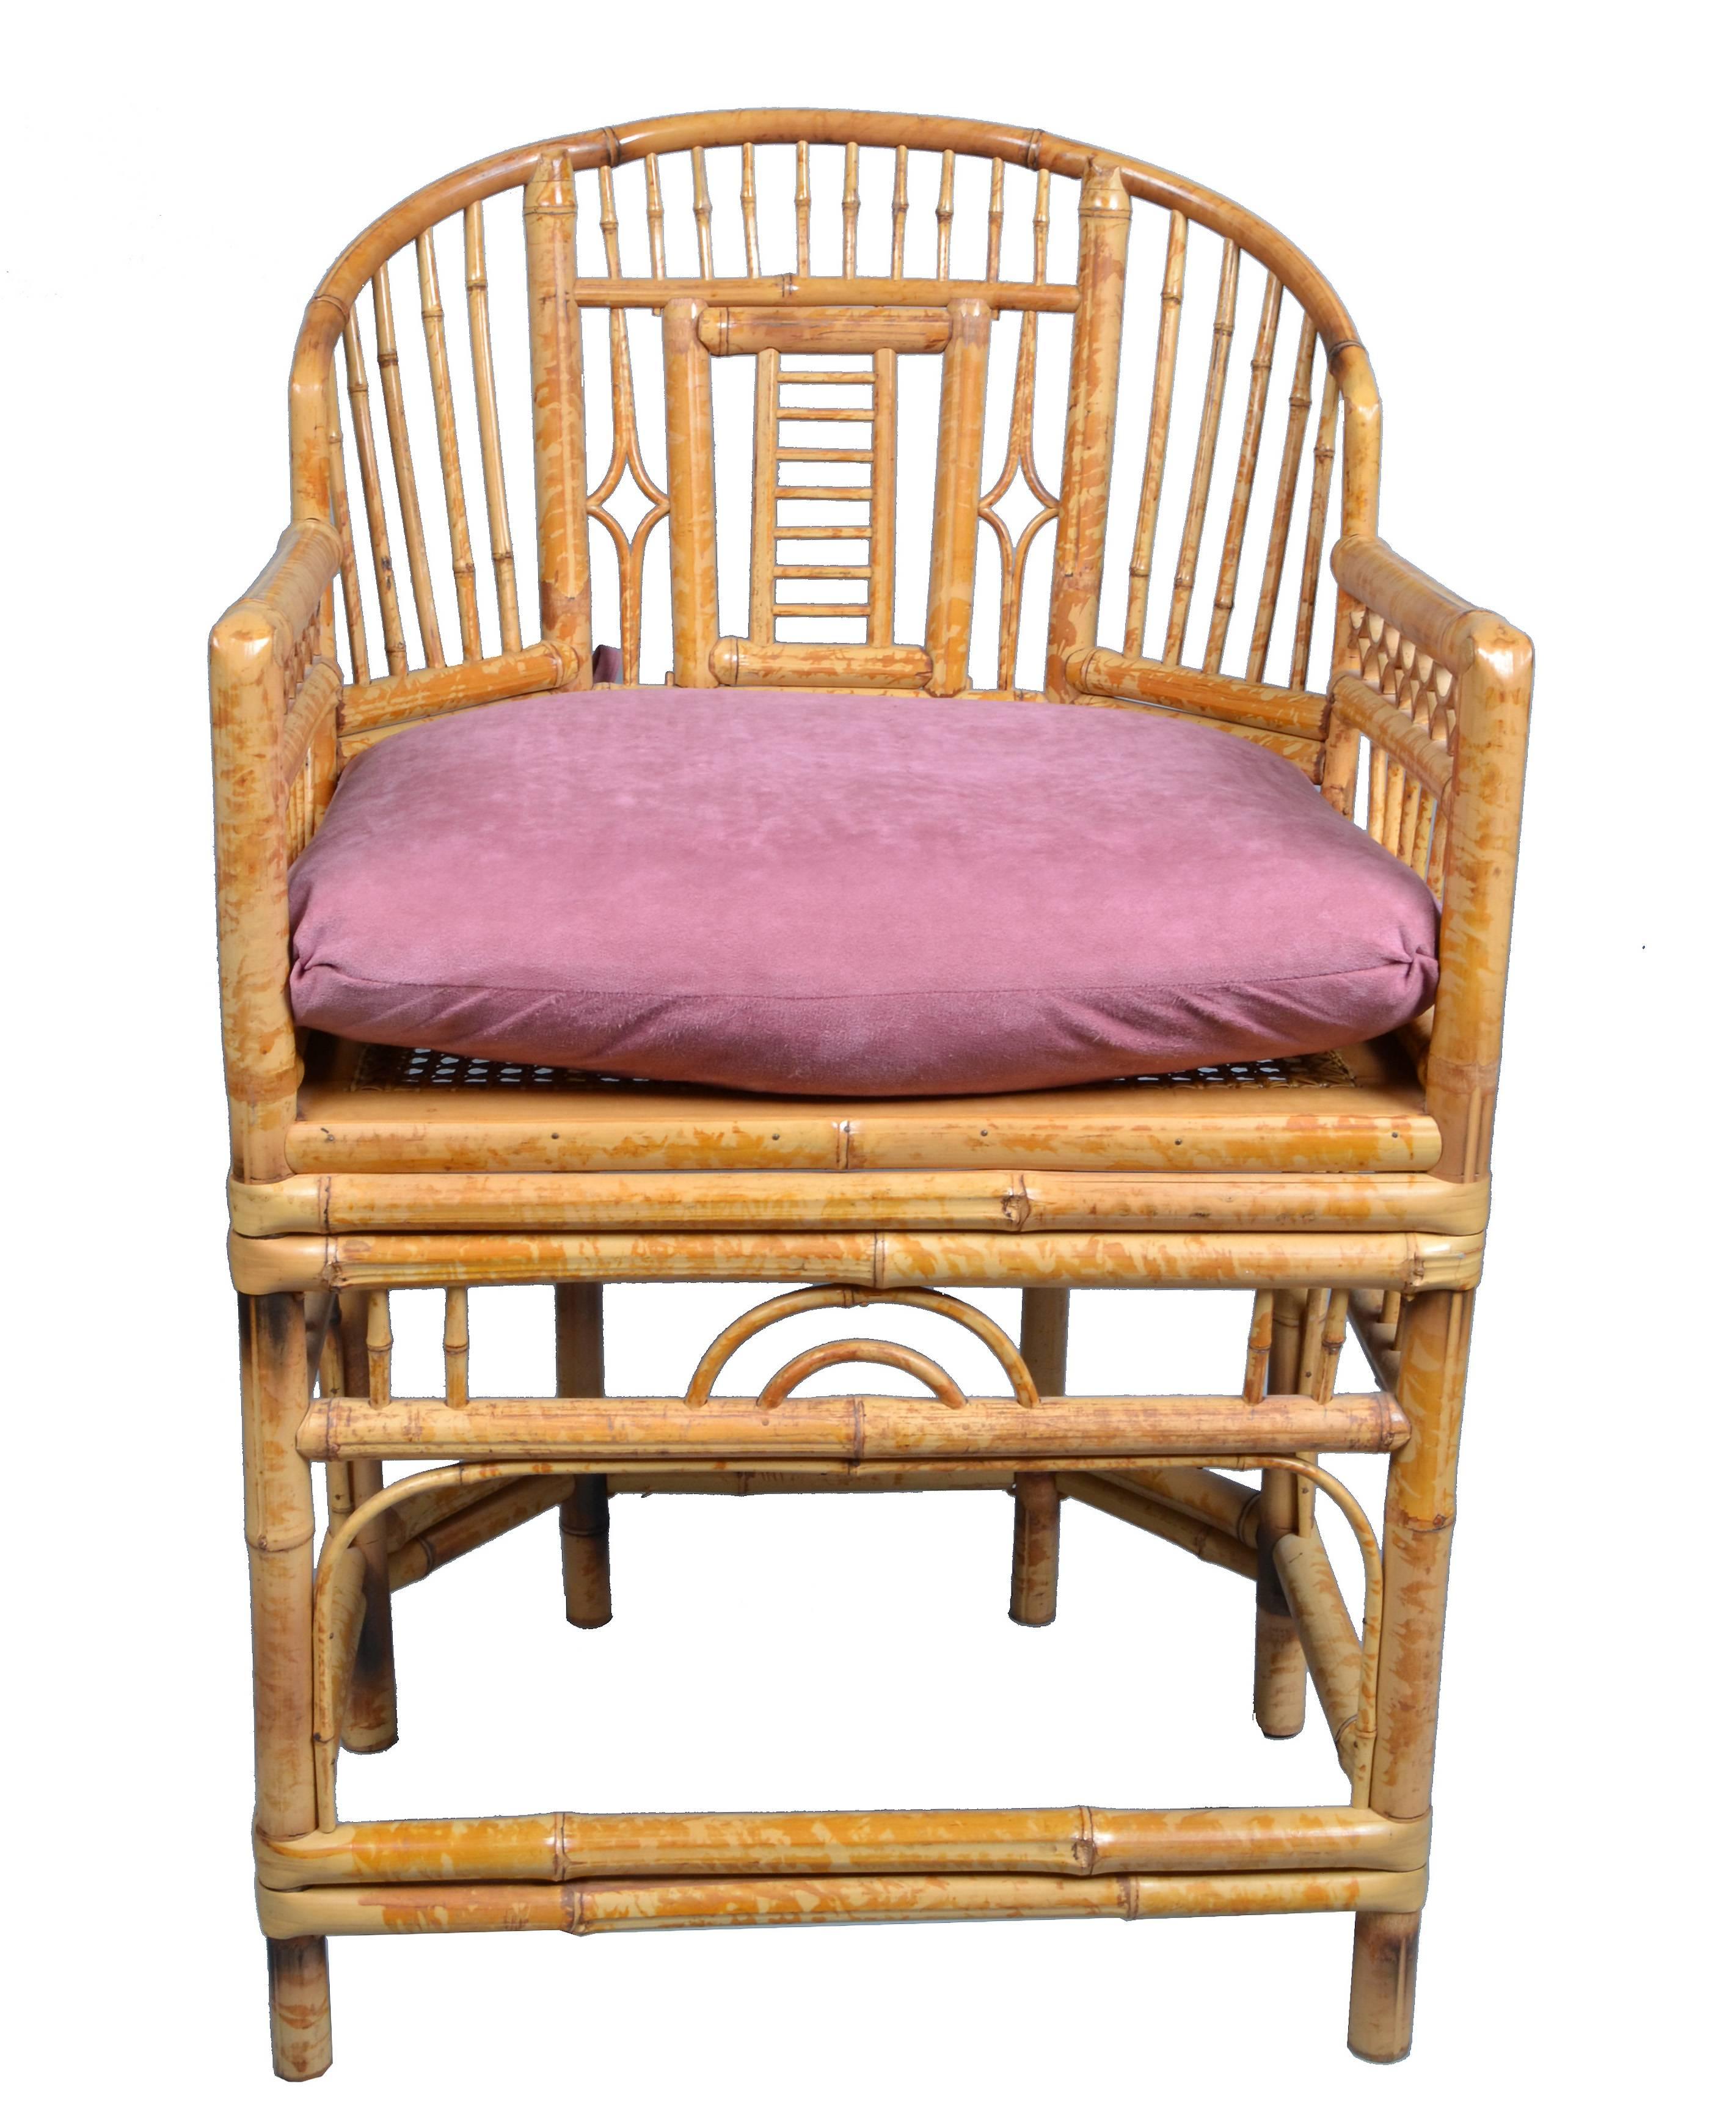 Vintage pair of bamboo armchairs on six legs. These are handcrafted chairs with cane seats feature bamboo frames and Chinese inspired bamboo patterns. Each chair comes with a pink seat cushion. The backrests are designed with an extraordinary